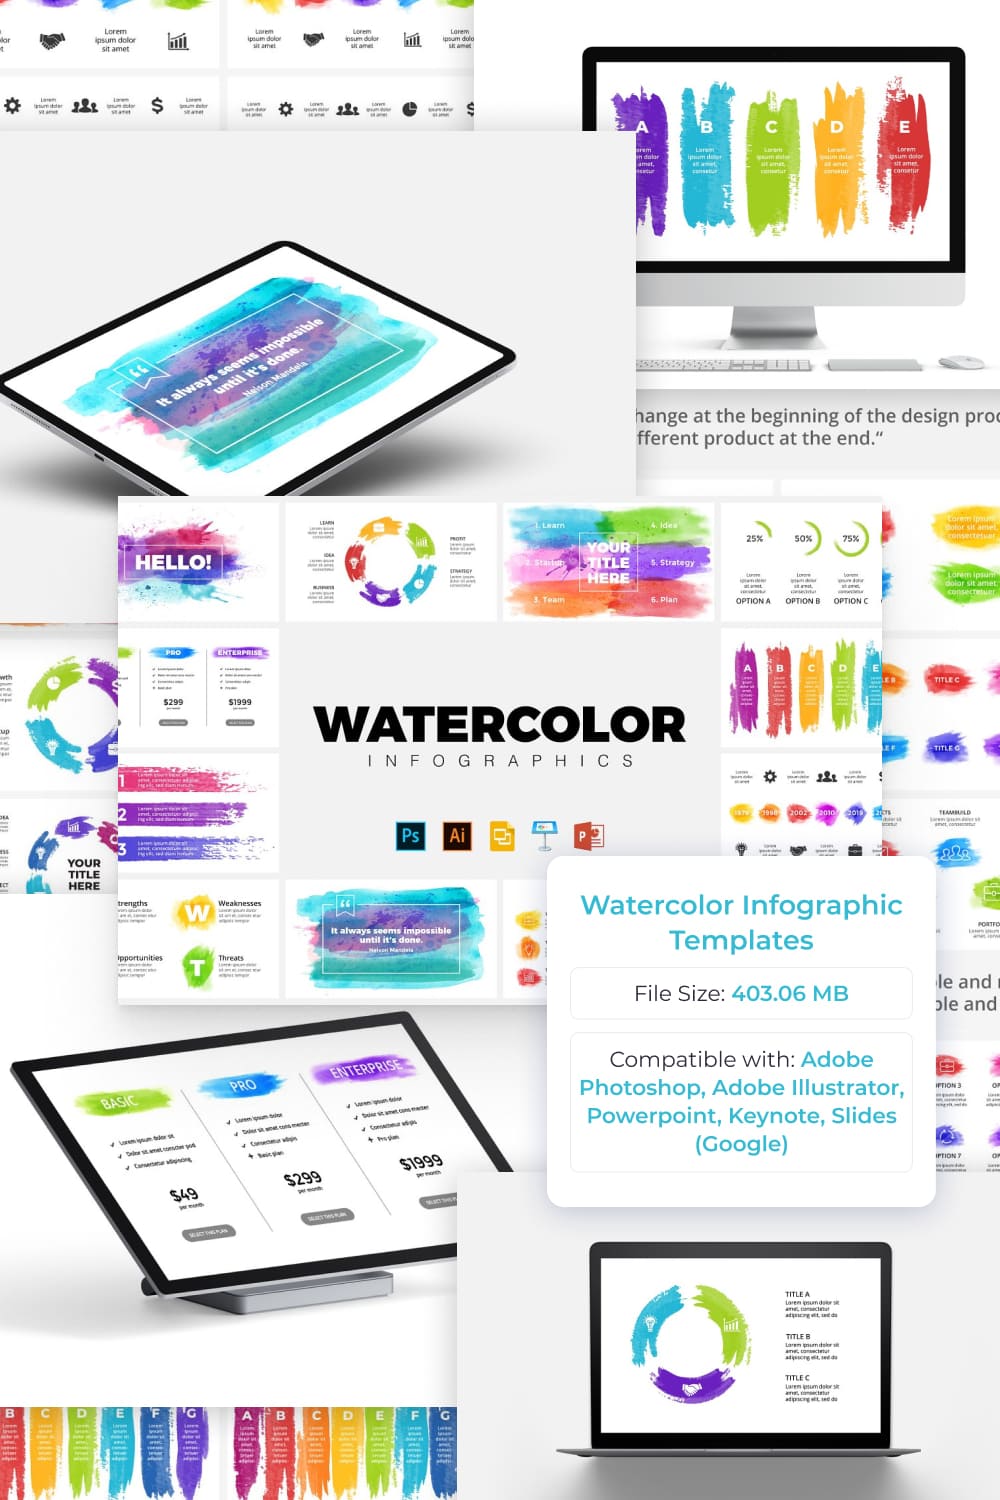 Watercolor Infographic Templates by MasterBundles Pinterest Collage Image.